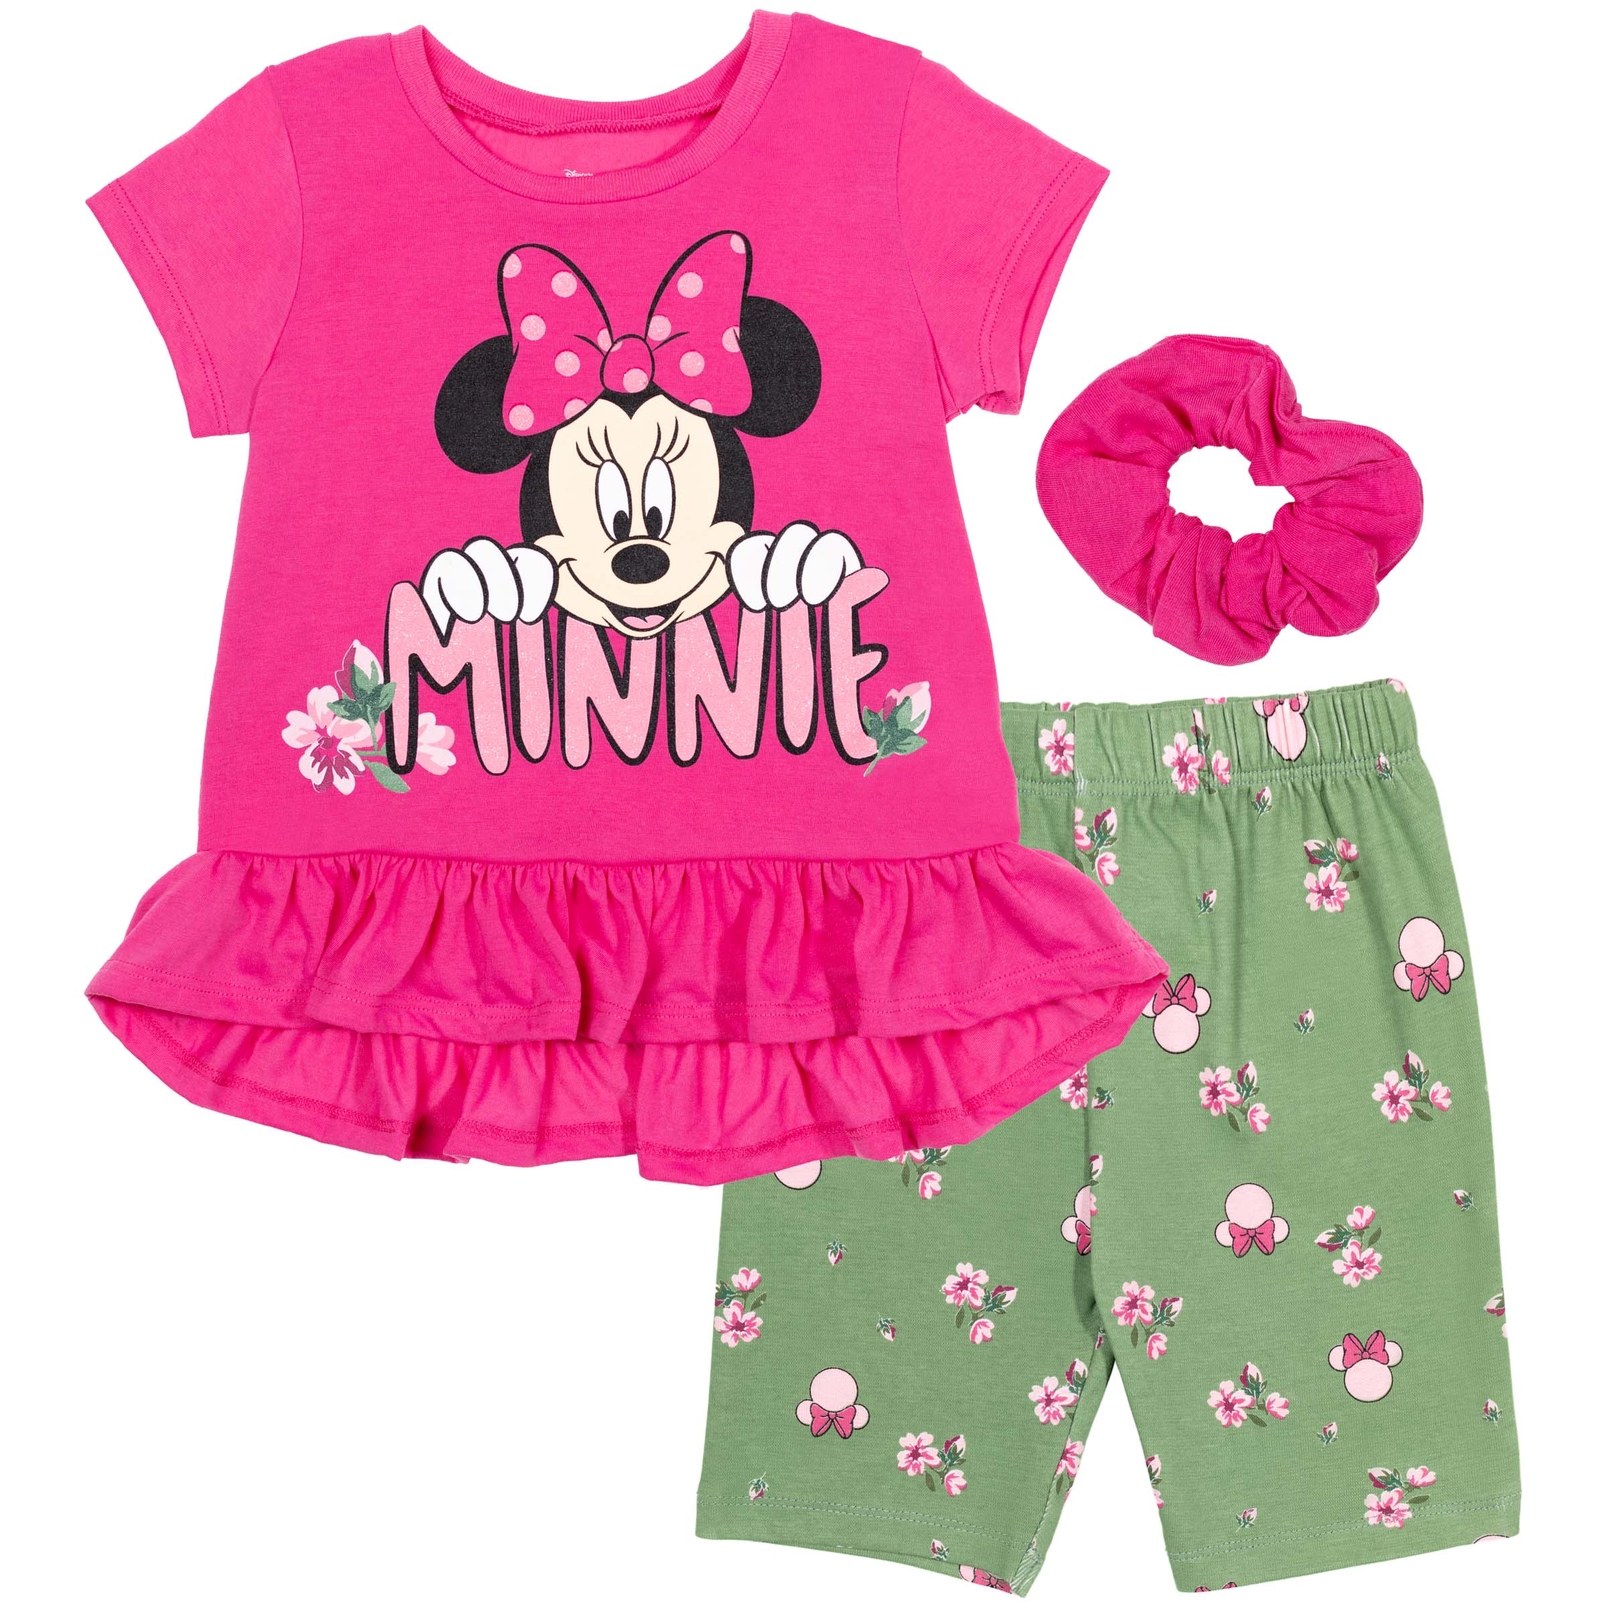 Disney Minnie Mouse Toddler Girls Peplum T-Shirt Bike Shorts and Scrunchie 3 Piece Outfit Set Infant to Big Kid - image 1 of 5